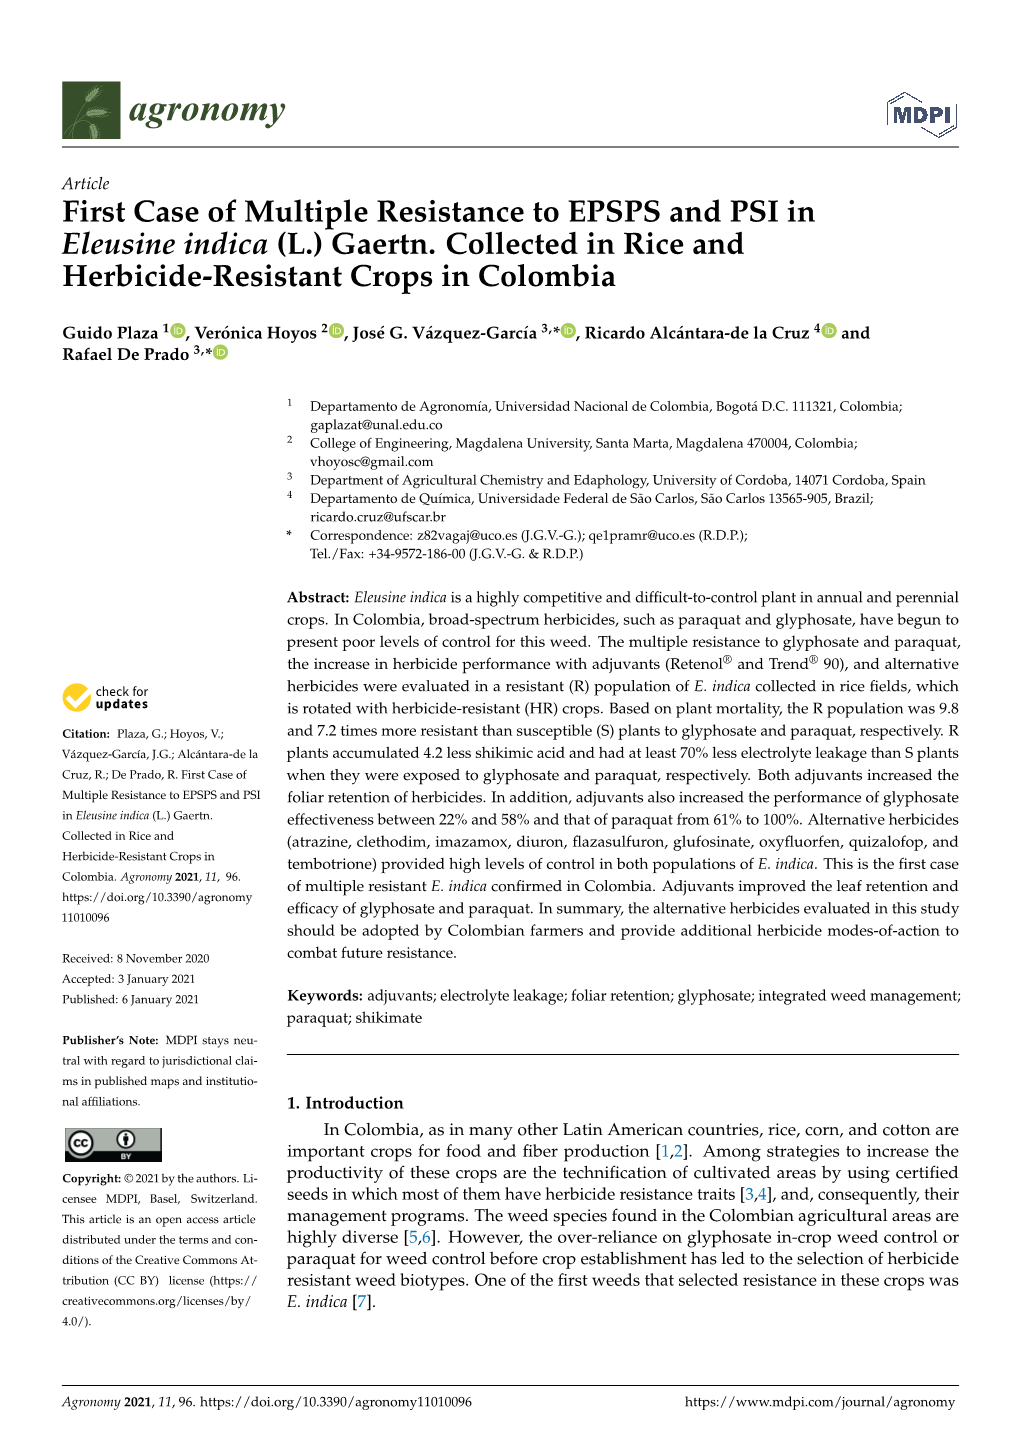 First Case of Multiple Resistance to EPSPS and PSI in Eleusine Indica (L.) Gaertn